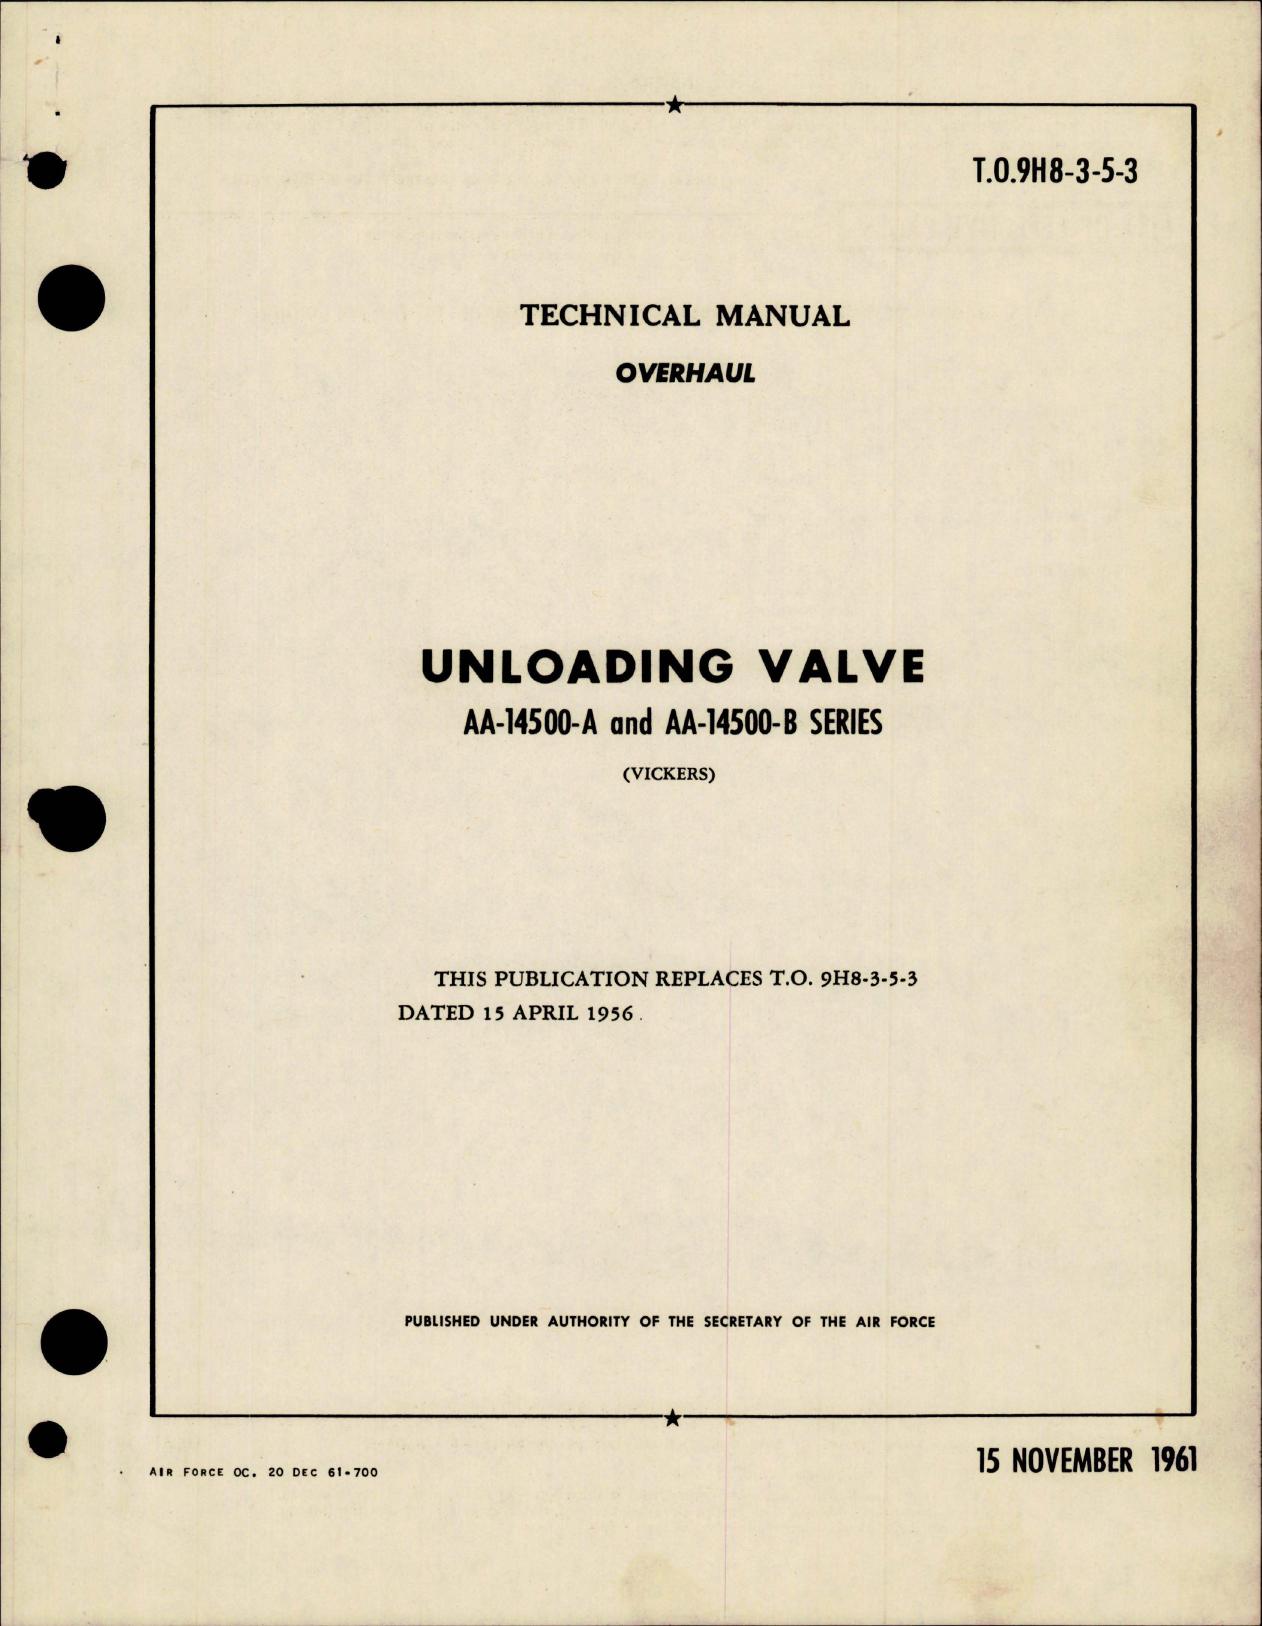 Sample page 1 from AirCorps Library document: Overhaul Instructions for Unloading Valve - AA-14500-A and AA-14500-B Series